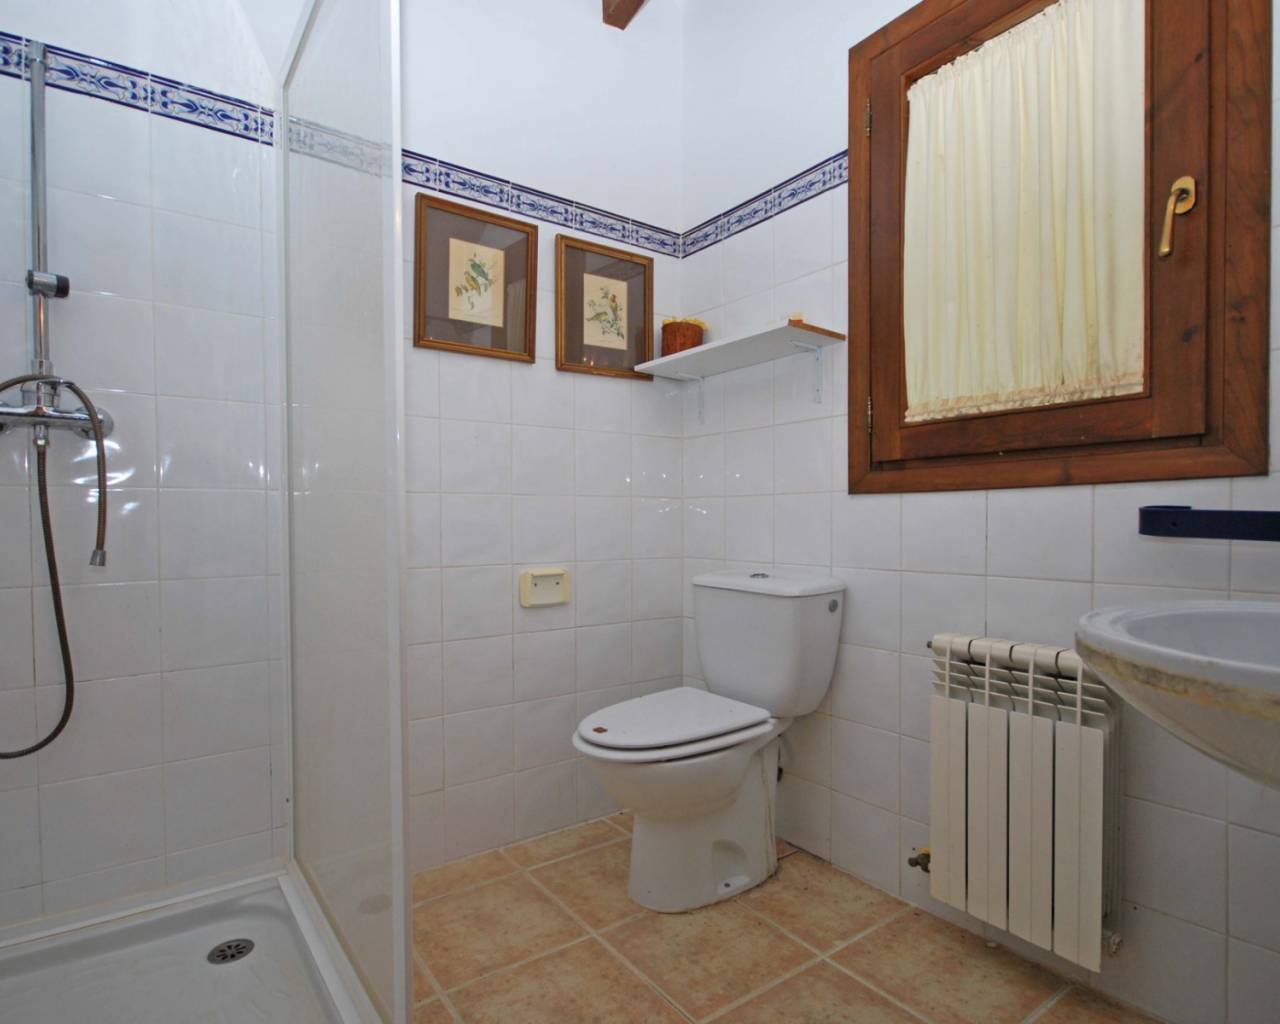 Resale - Country House - Benissa costa - Partida Canor